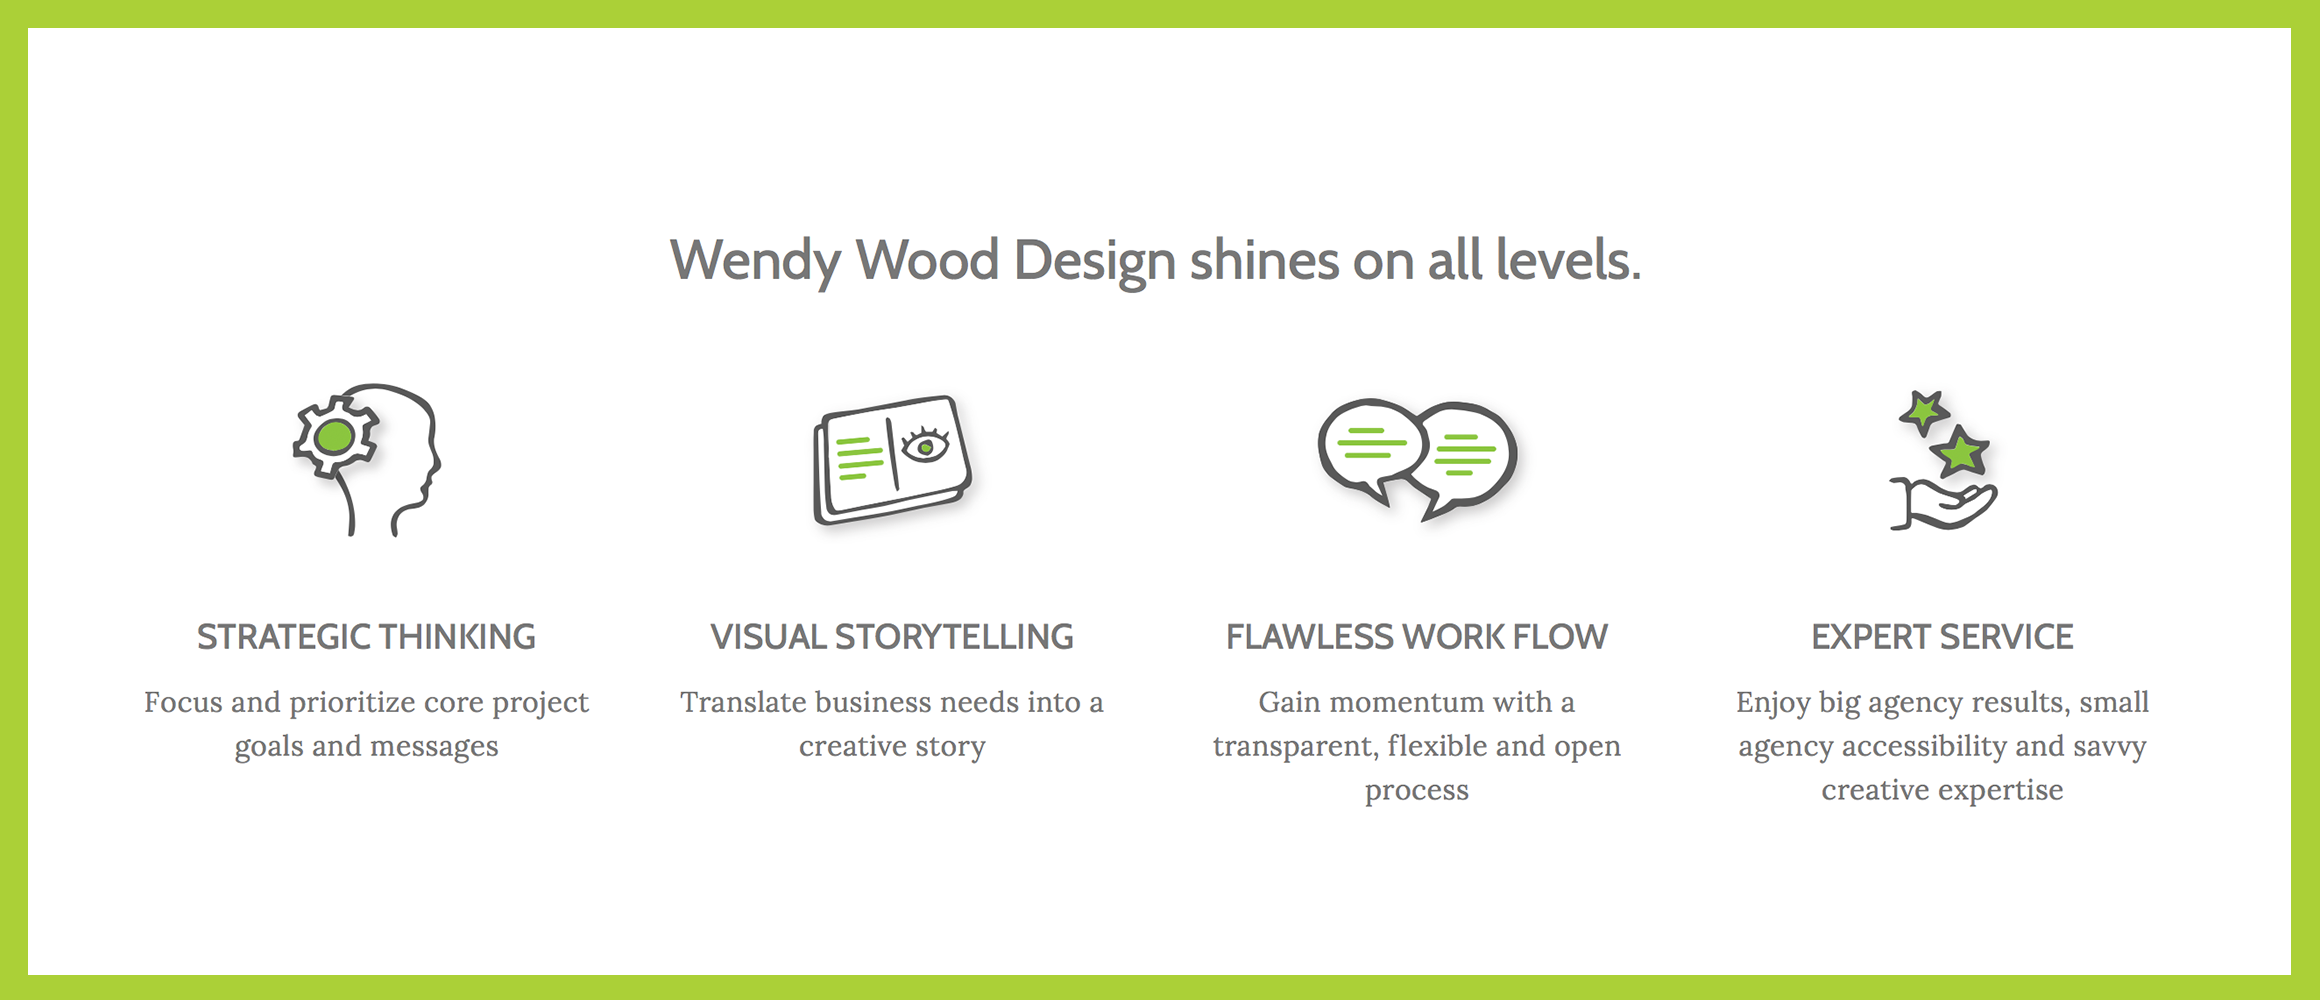 Behind The Scenes The Icon Design Development Process Wendy Wood